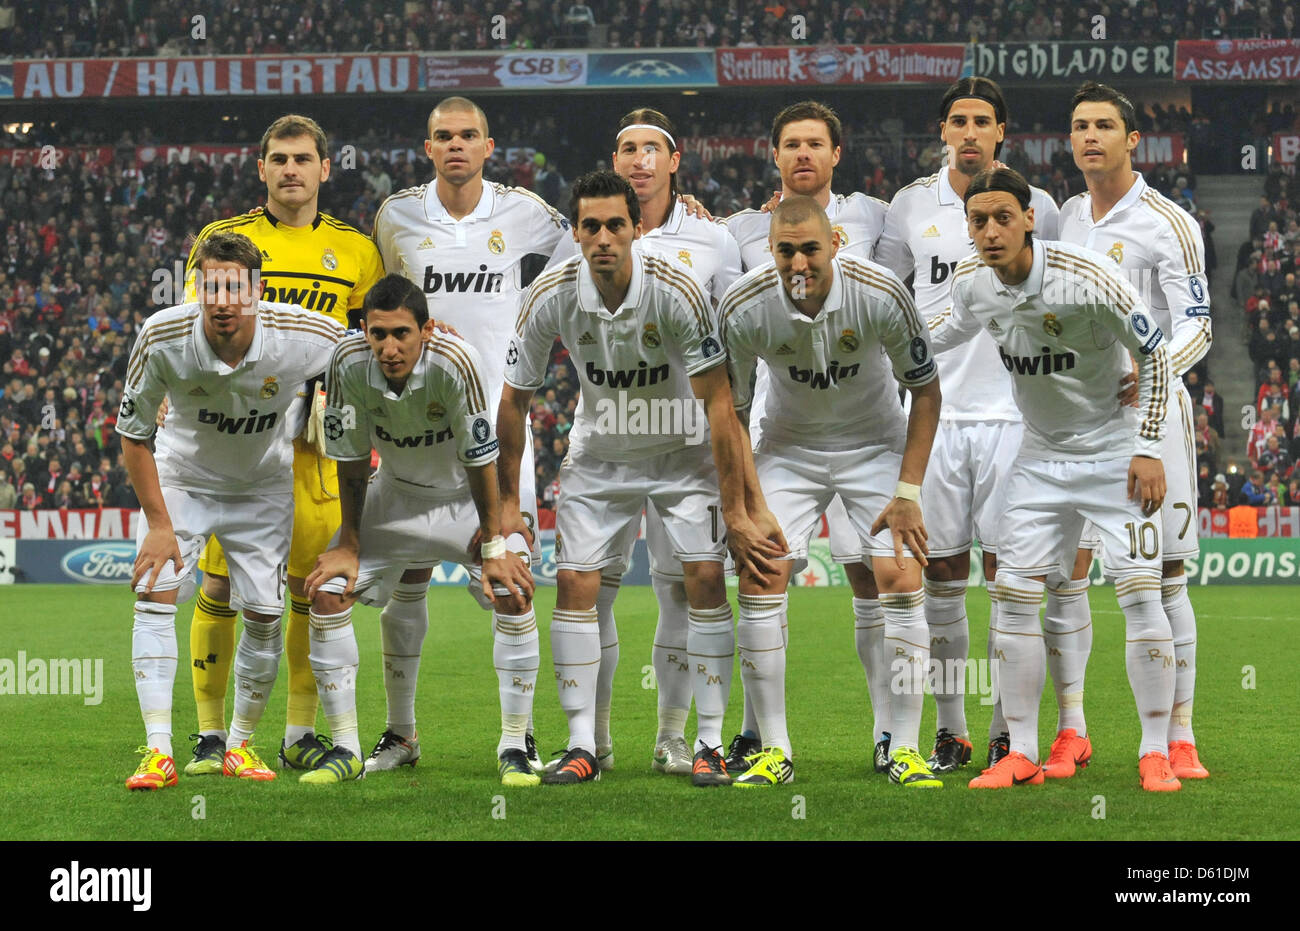 Madrid's starting line-up is pictured before the Champions League semi-final first leg soccer match between FC Bayern Munich and Real Madrid at the Allianz Arena in Munich, Germany, 17 April 2012. Back Row: Goalkeeper Iker Casillas, Kepler Laveran Lima Ferreira (Pepe), Sergio Ramos, Xabi Alonso, Sami Khedira and Cristiano Ronaldo. Front: Fabio Coentrao, Angel Di Maria, Alvaro Arbel Stock Photo